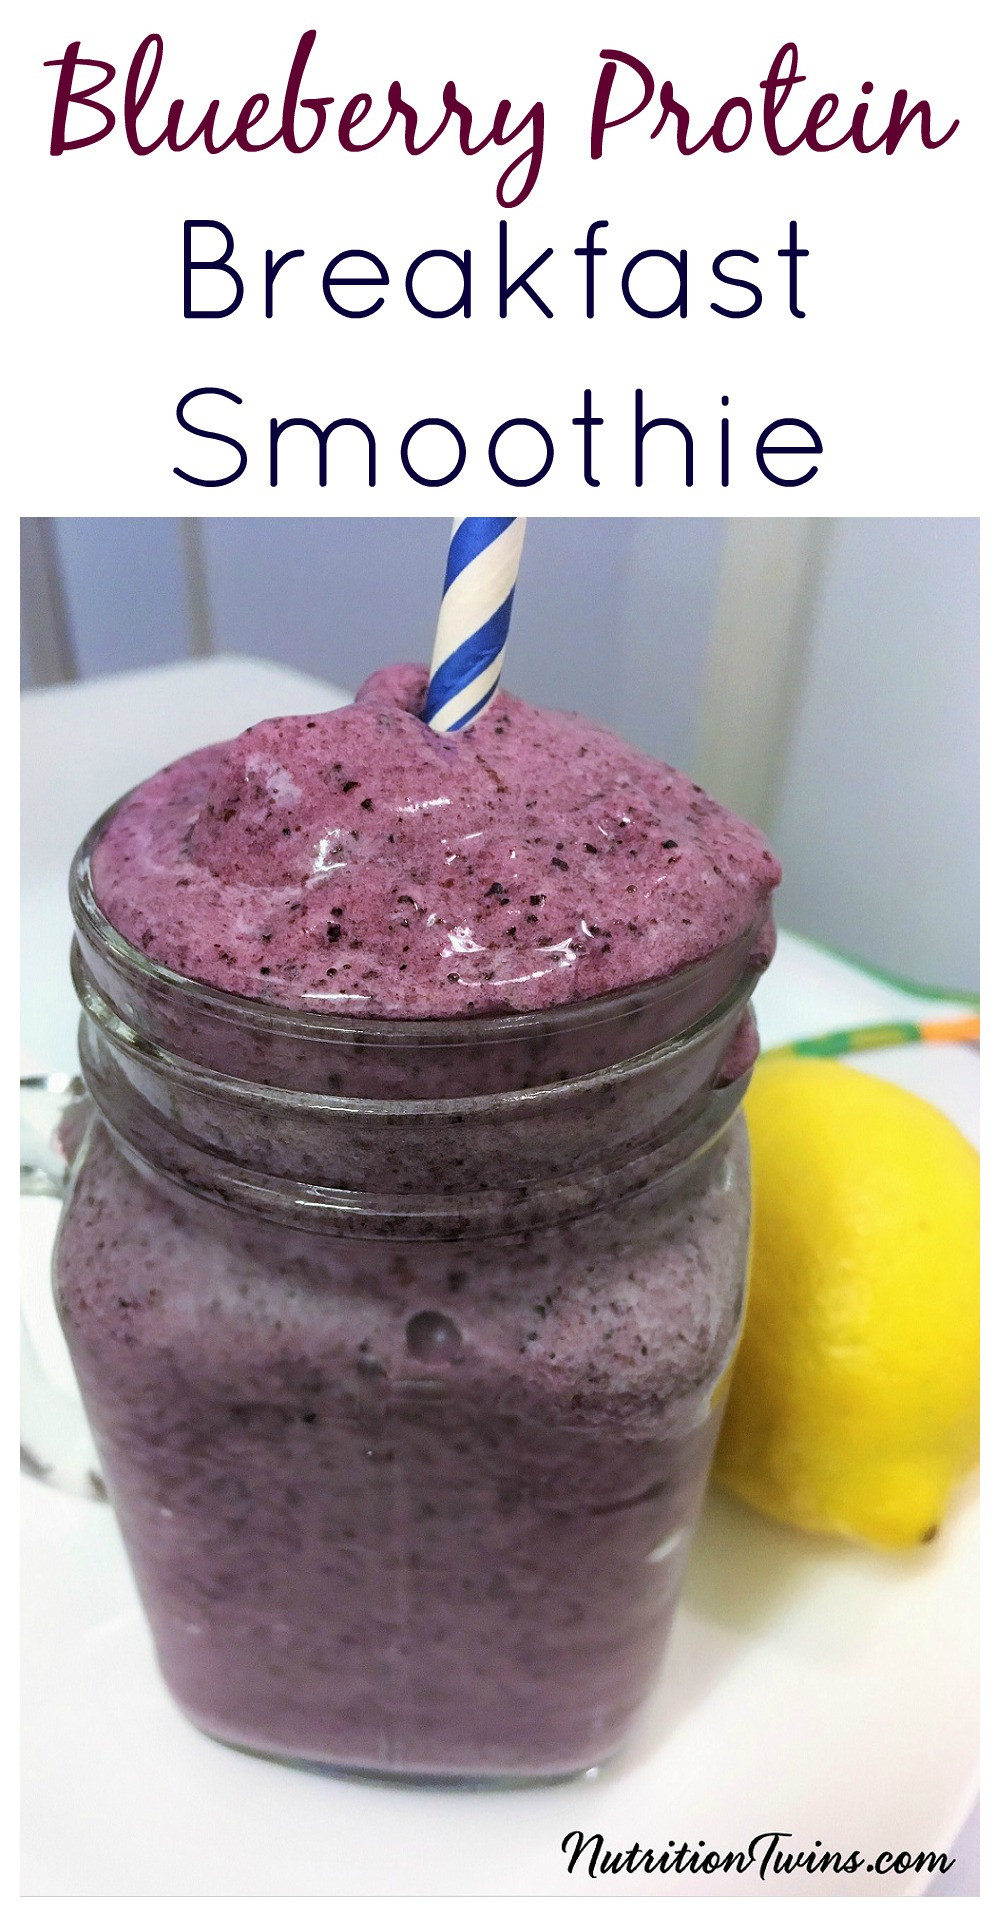 Best Breakfast Smoothies For Weight Loss
 Blueberry Protein Weight Loss Breakfast Smoothie